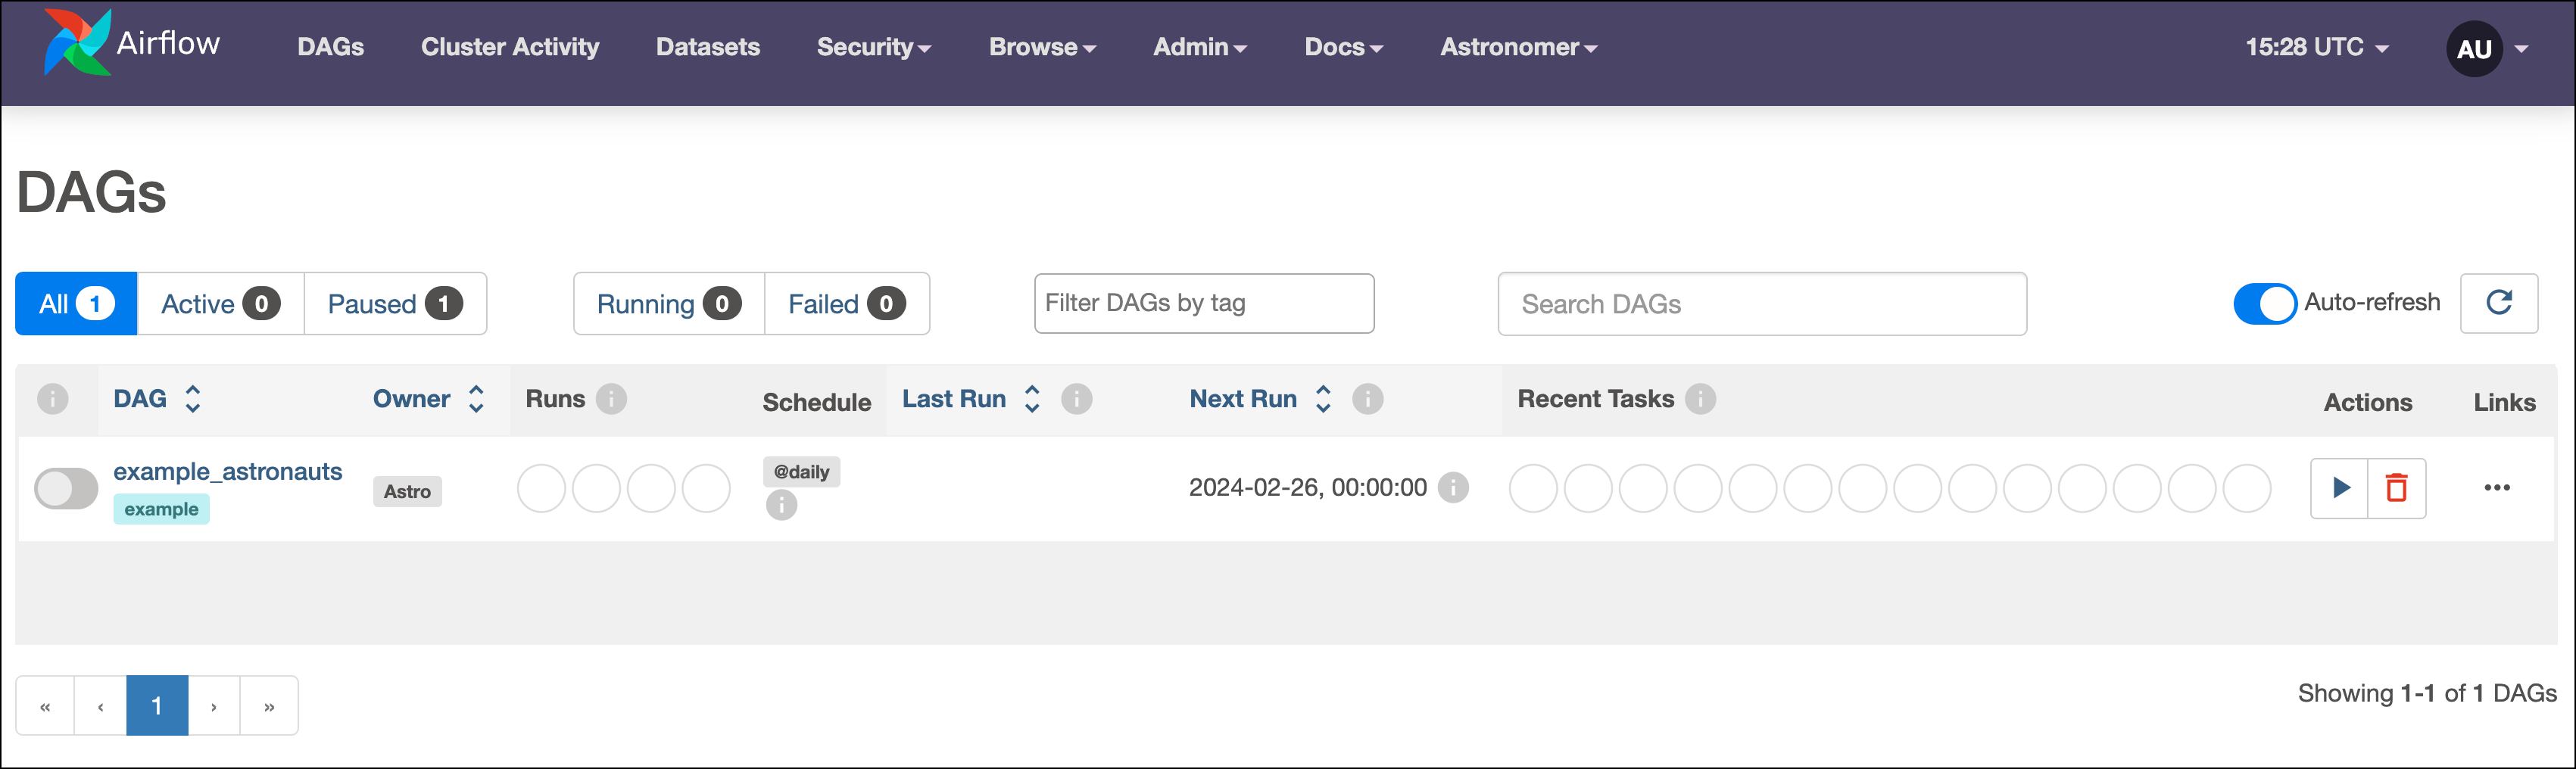 Screenshot of the DAGs page of the Airflow UI showing the example_astronauts DAG with no run history yet.